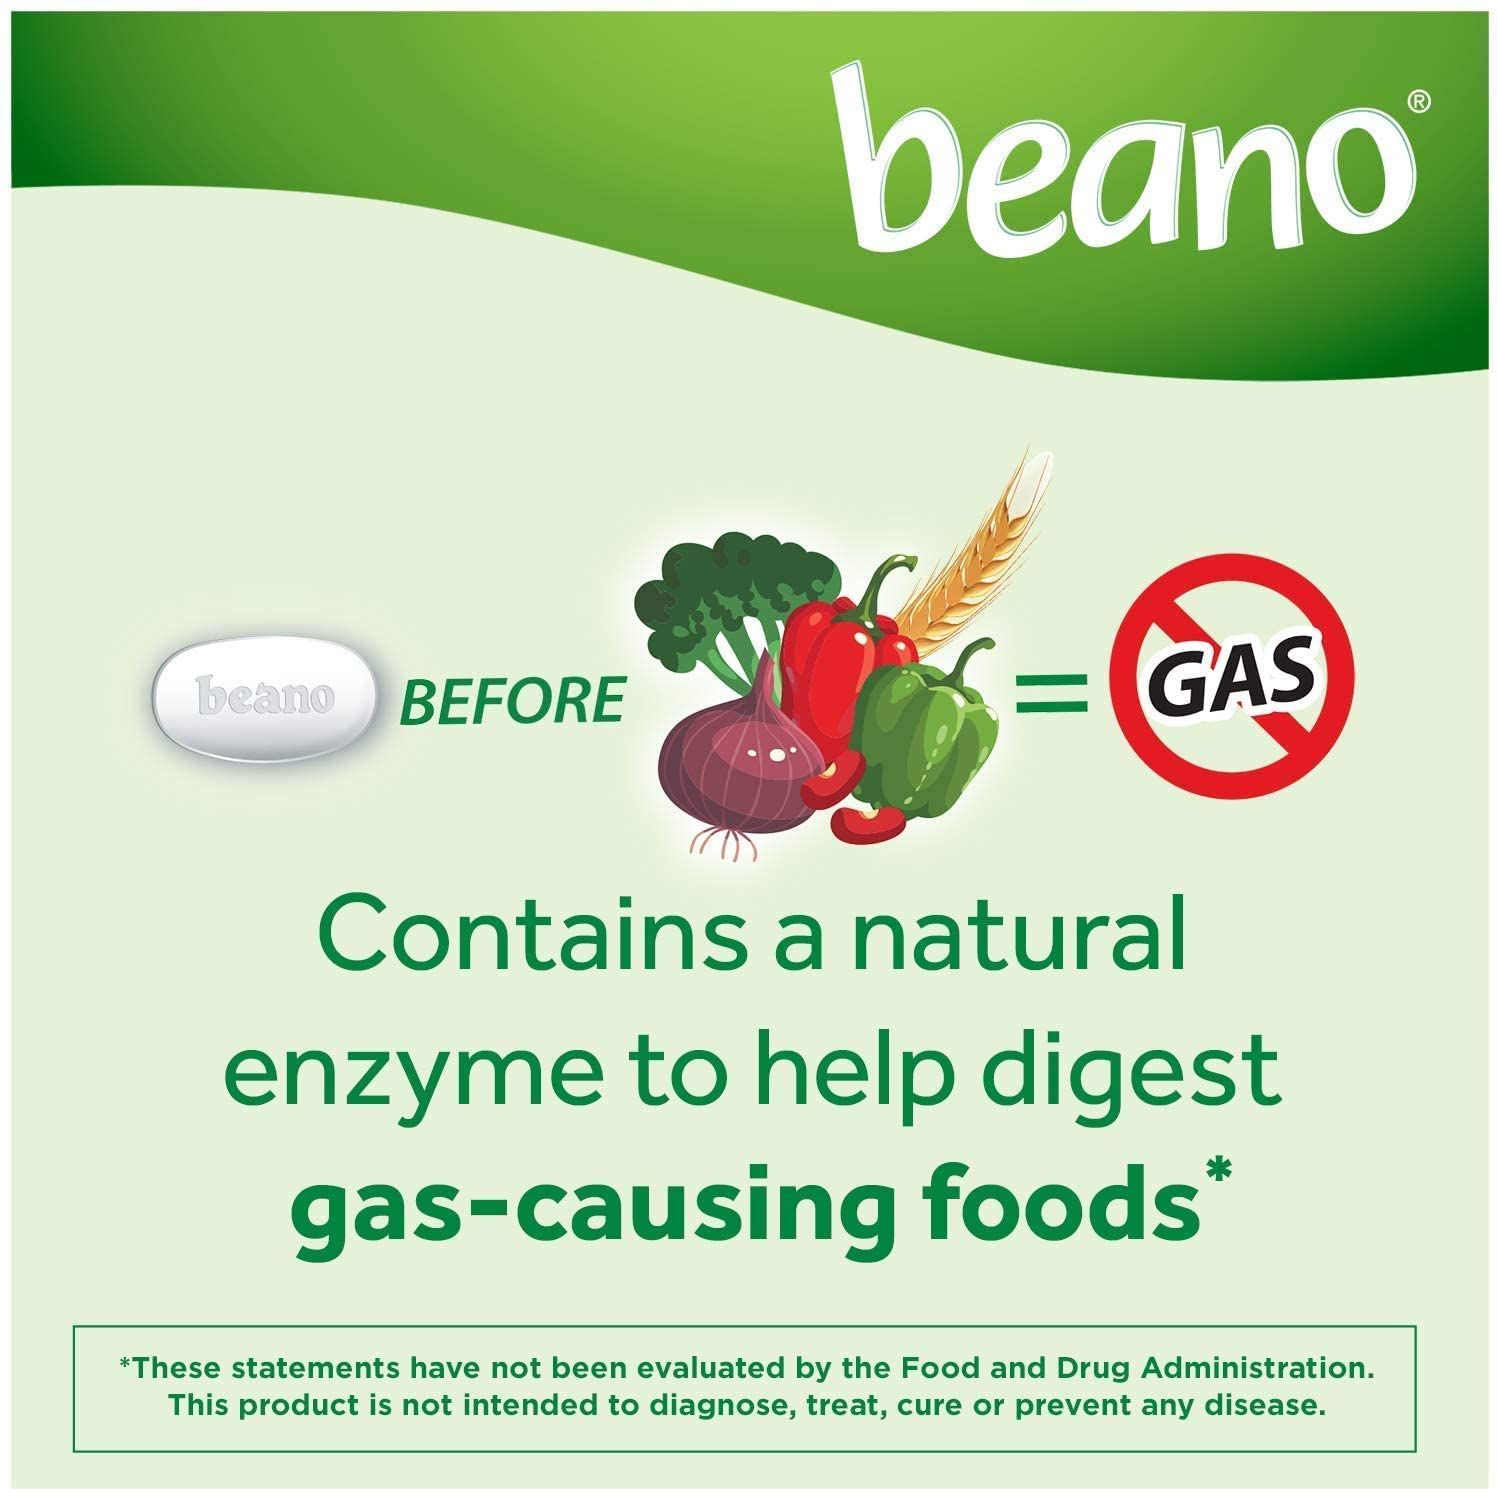 Beano Food Enzyme Dietary Supplement  - 100 ct